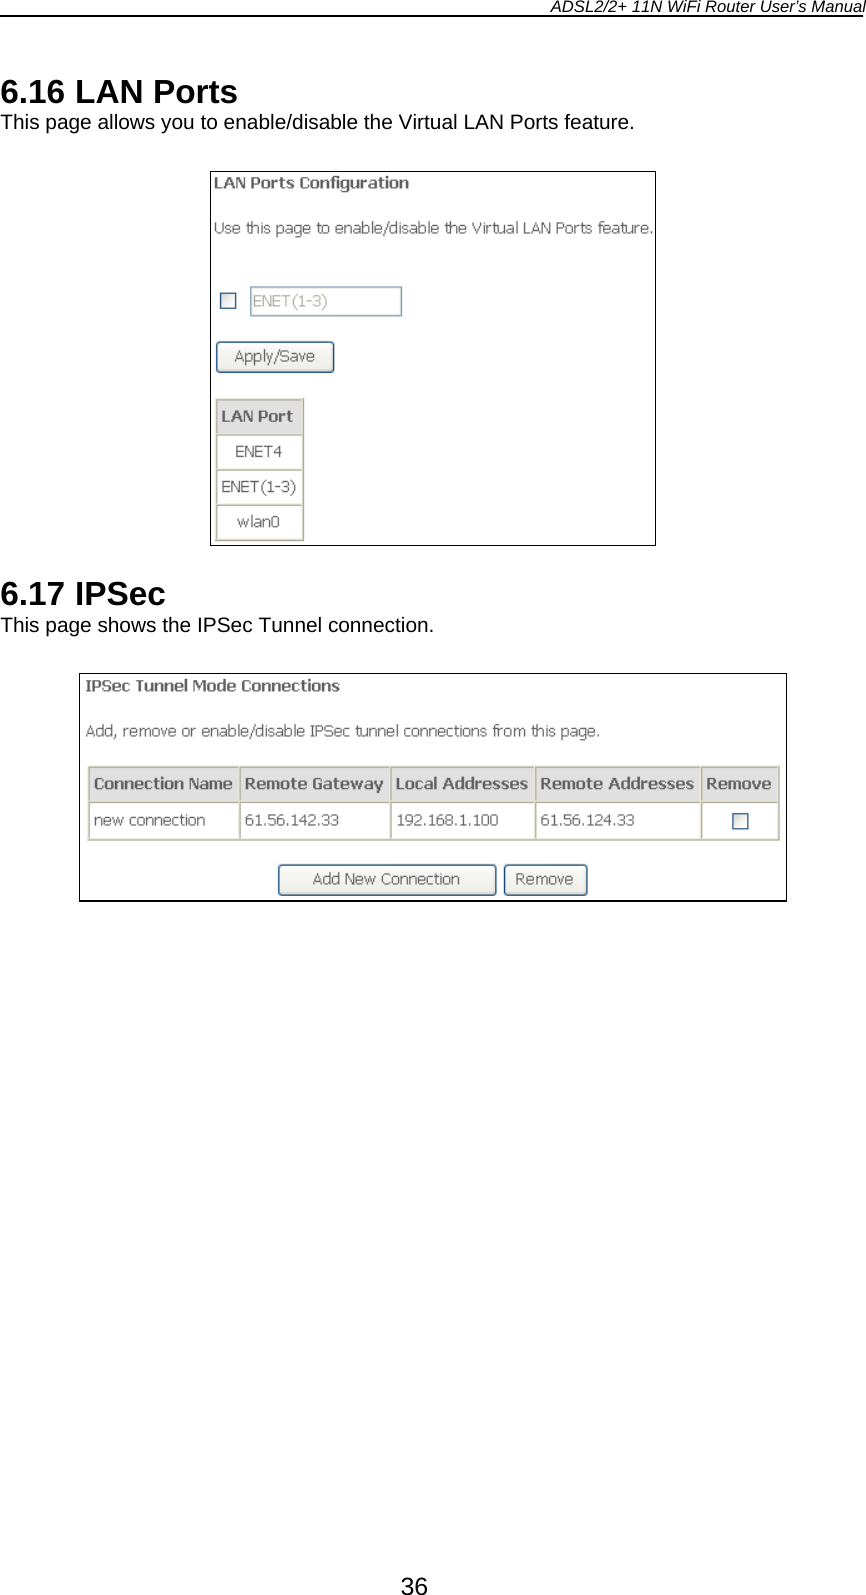 ADSL2/2+ 11N WiFi Router User’s Manual  36 6.16 LAN Ports This page allows you to enable/disable the Virtual LAN Ports feature.     6.17 IPSec This page shows the IPSec Tunnel connection.    